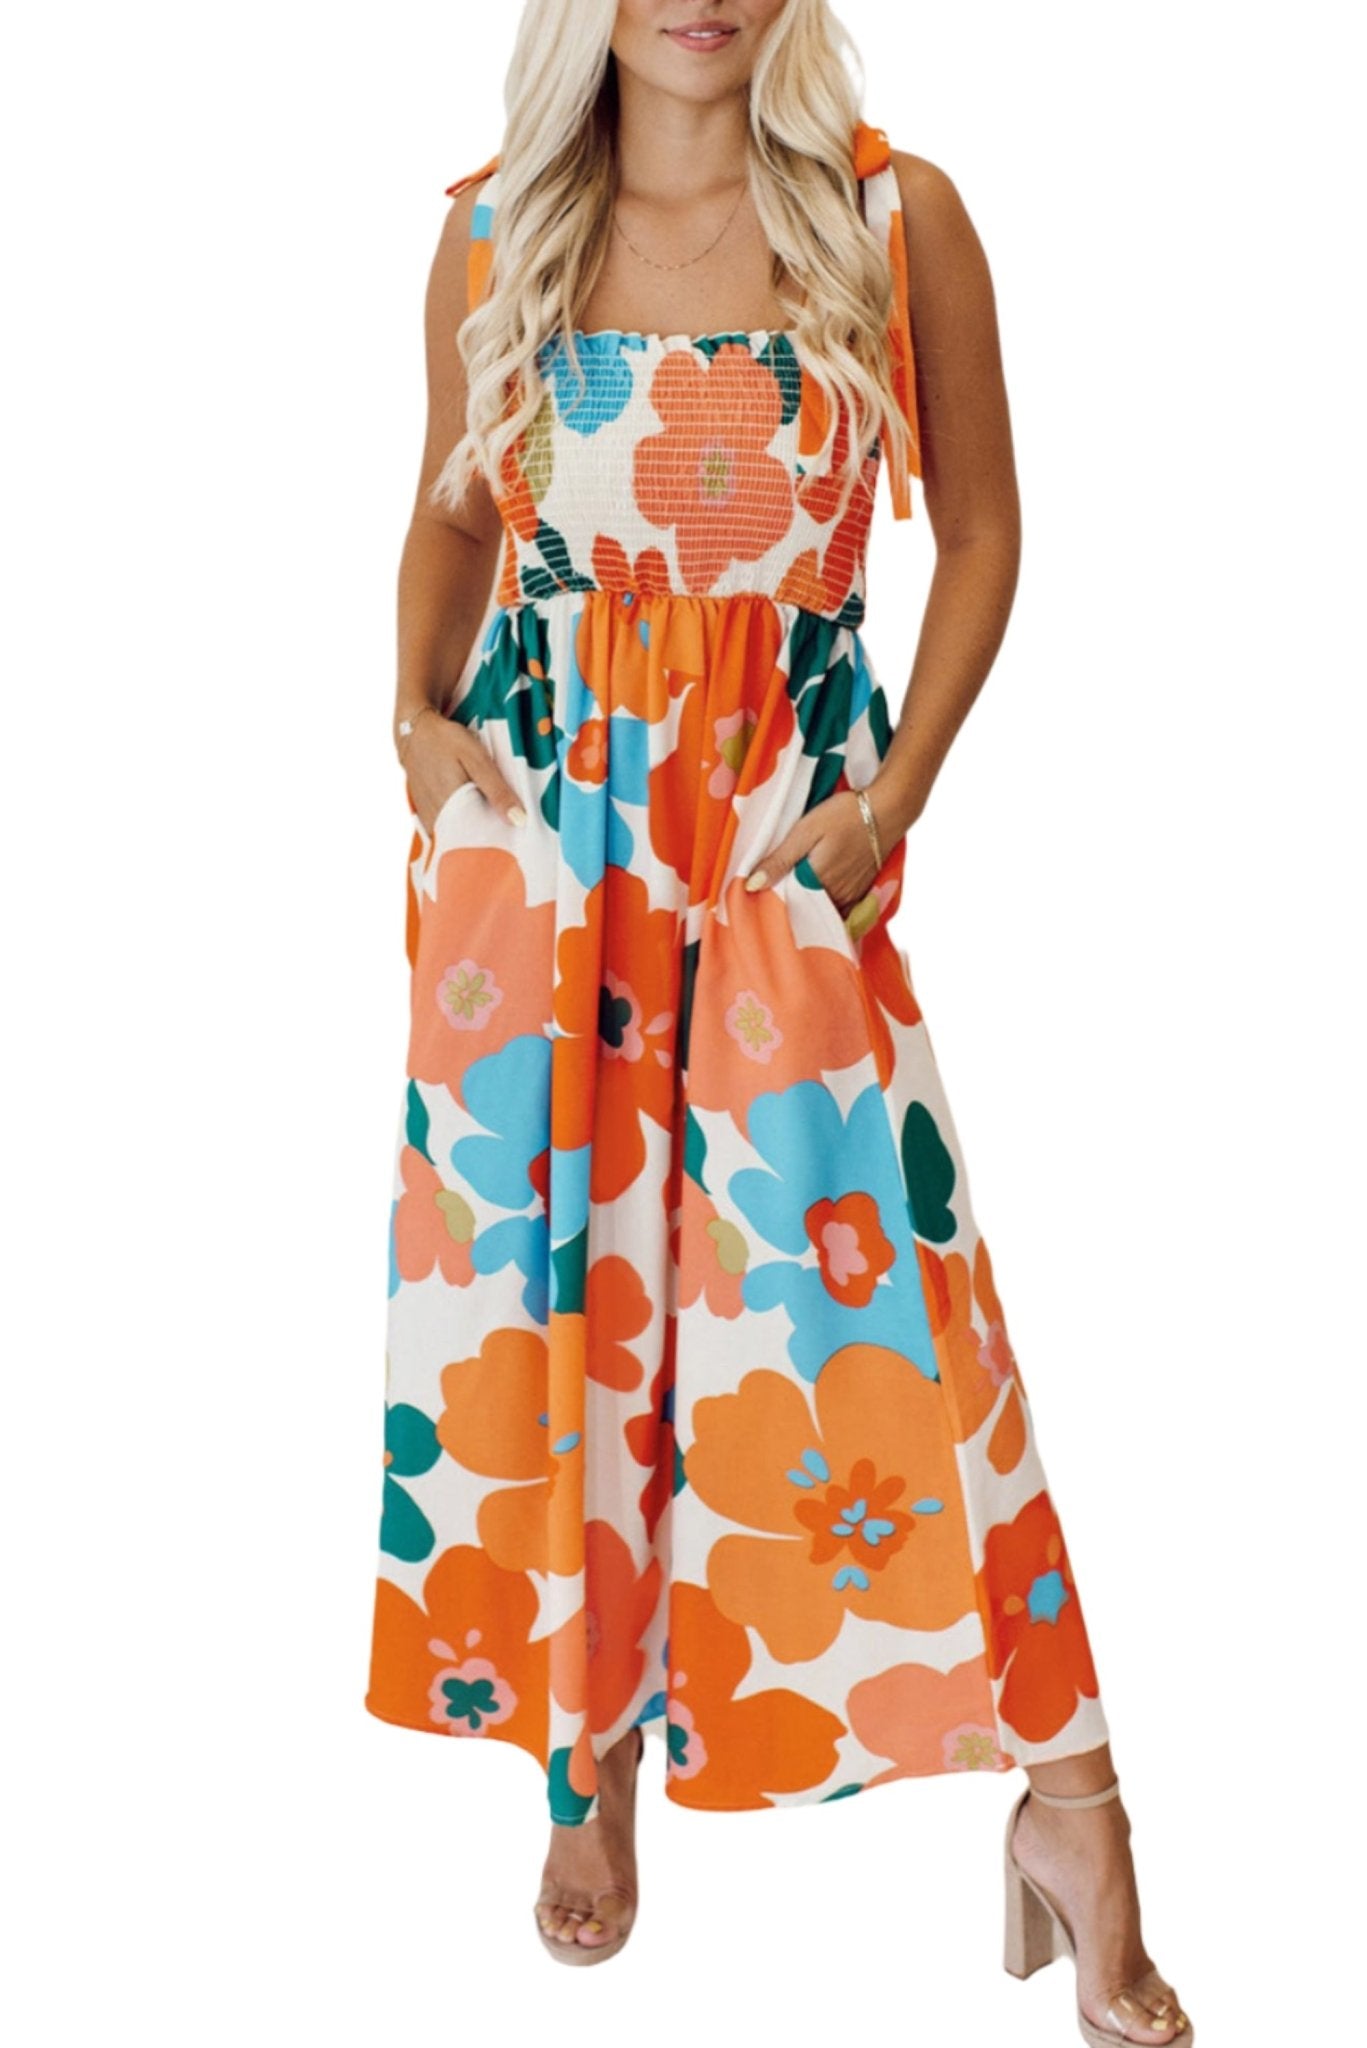 The image is showcasing a Women Floral Self Tied Straps Smocked Bust Maxi Dress With Pockets at Mommy & Lino's Closet